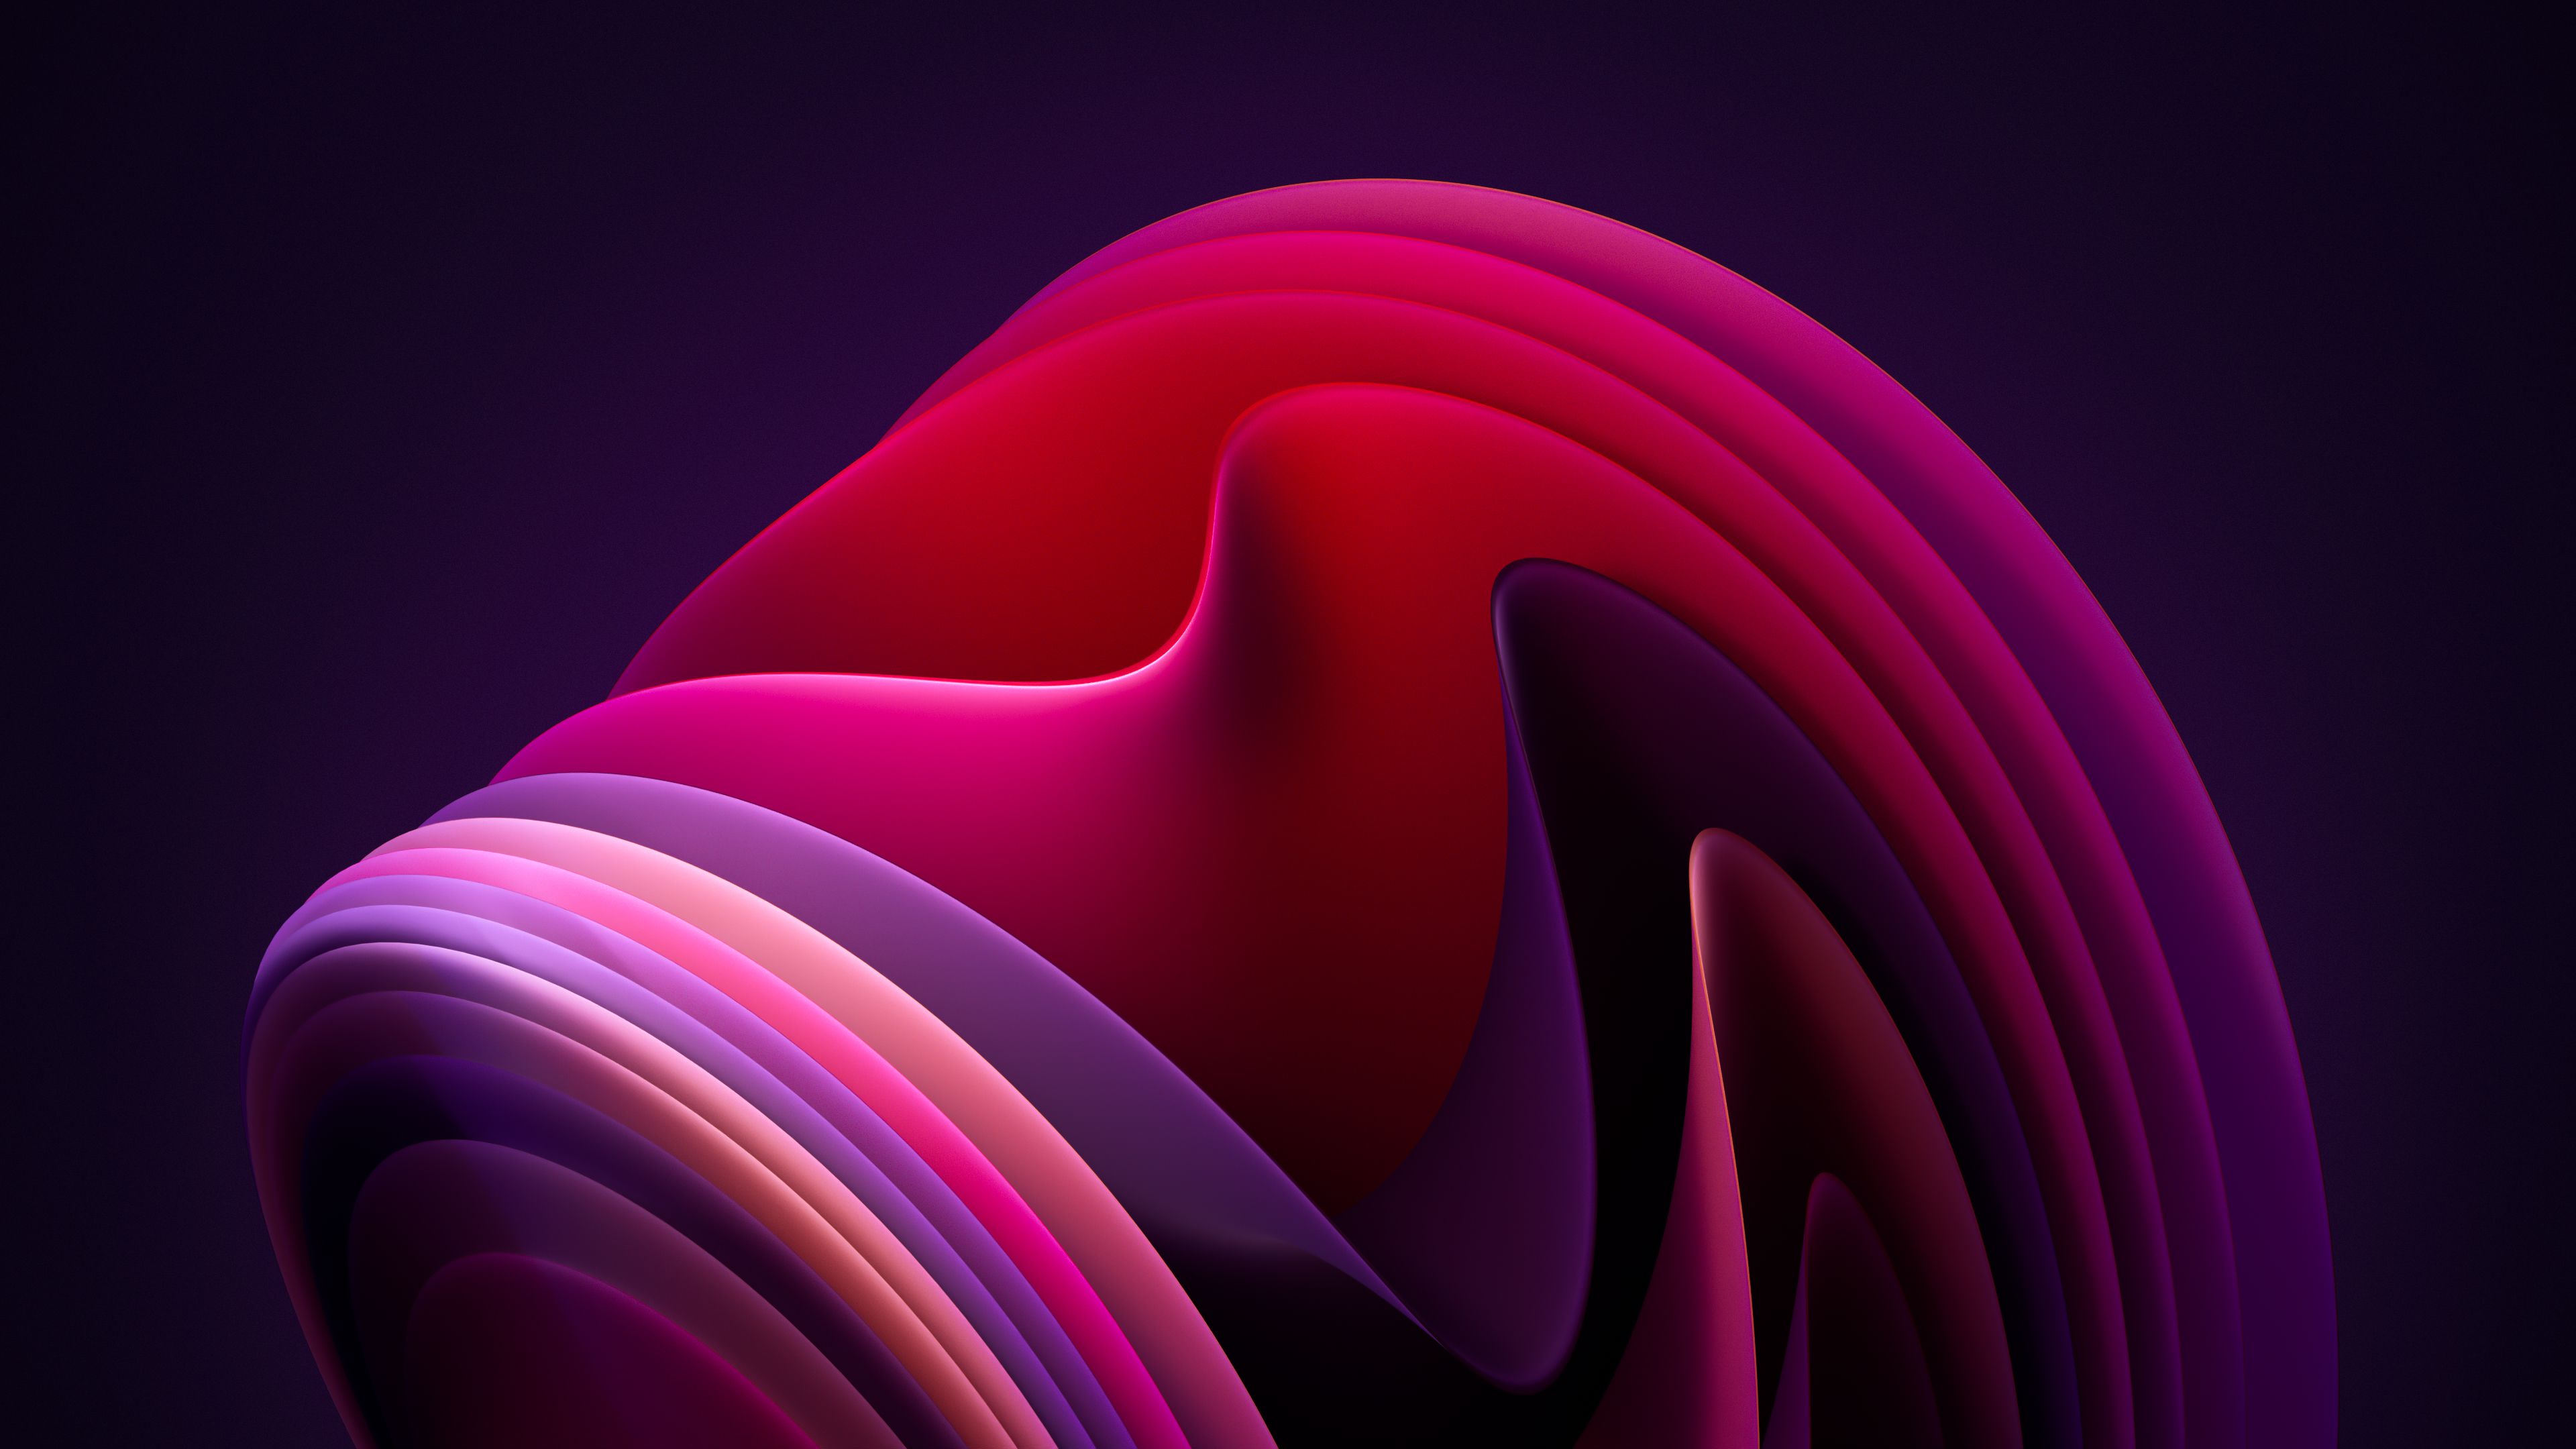 A 3D image of a pink and purple abstract piece on a black background - Windows 11